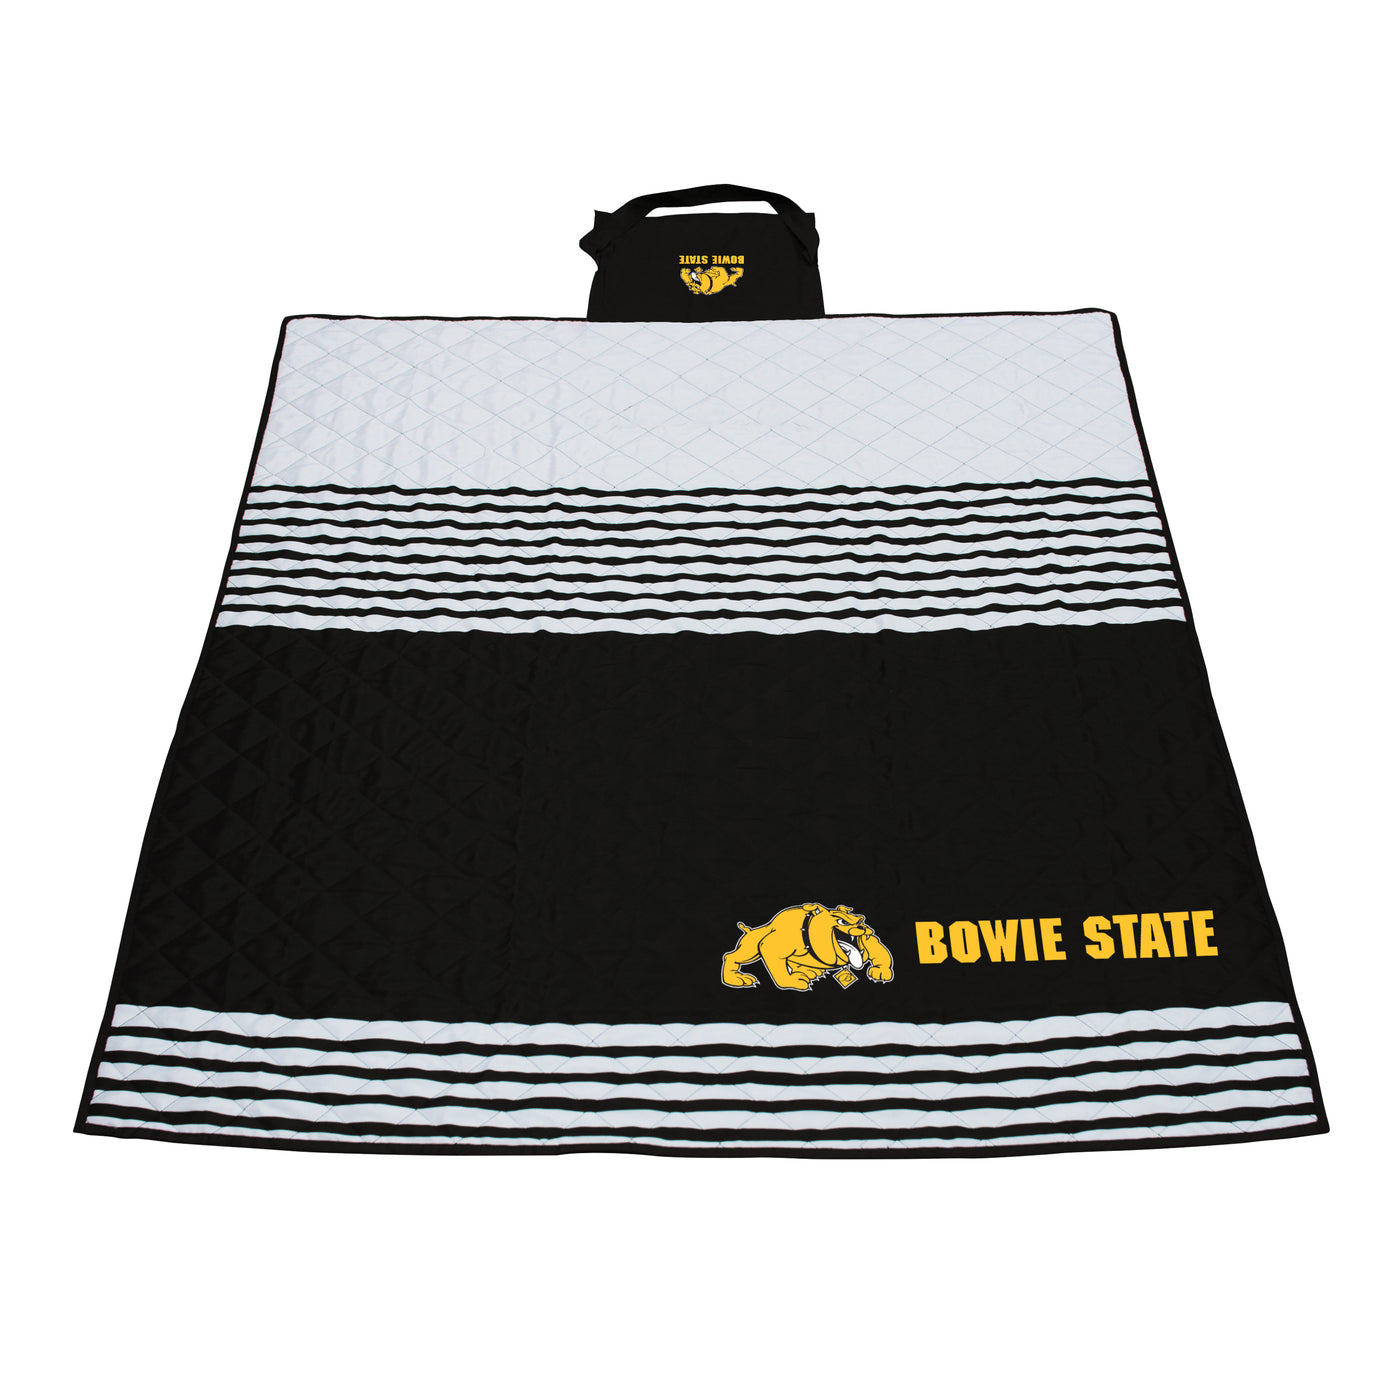 Bowie State Outdoor Blanket